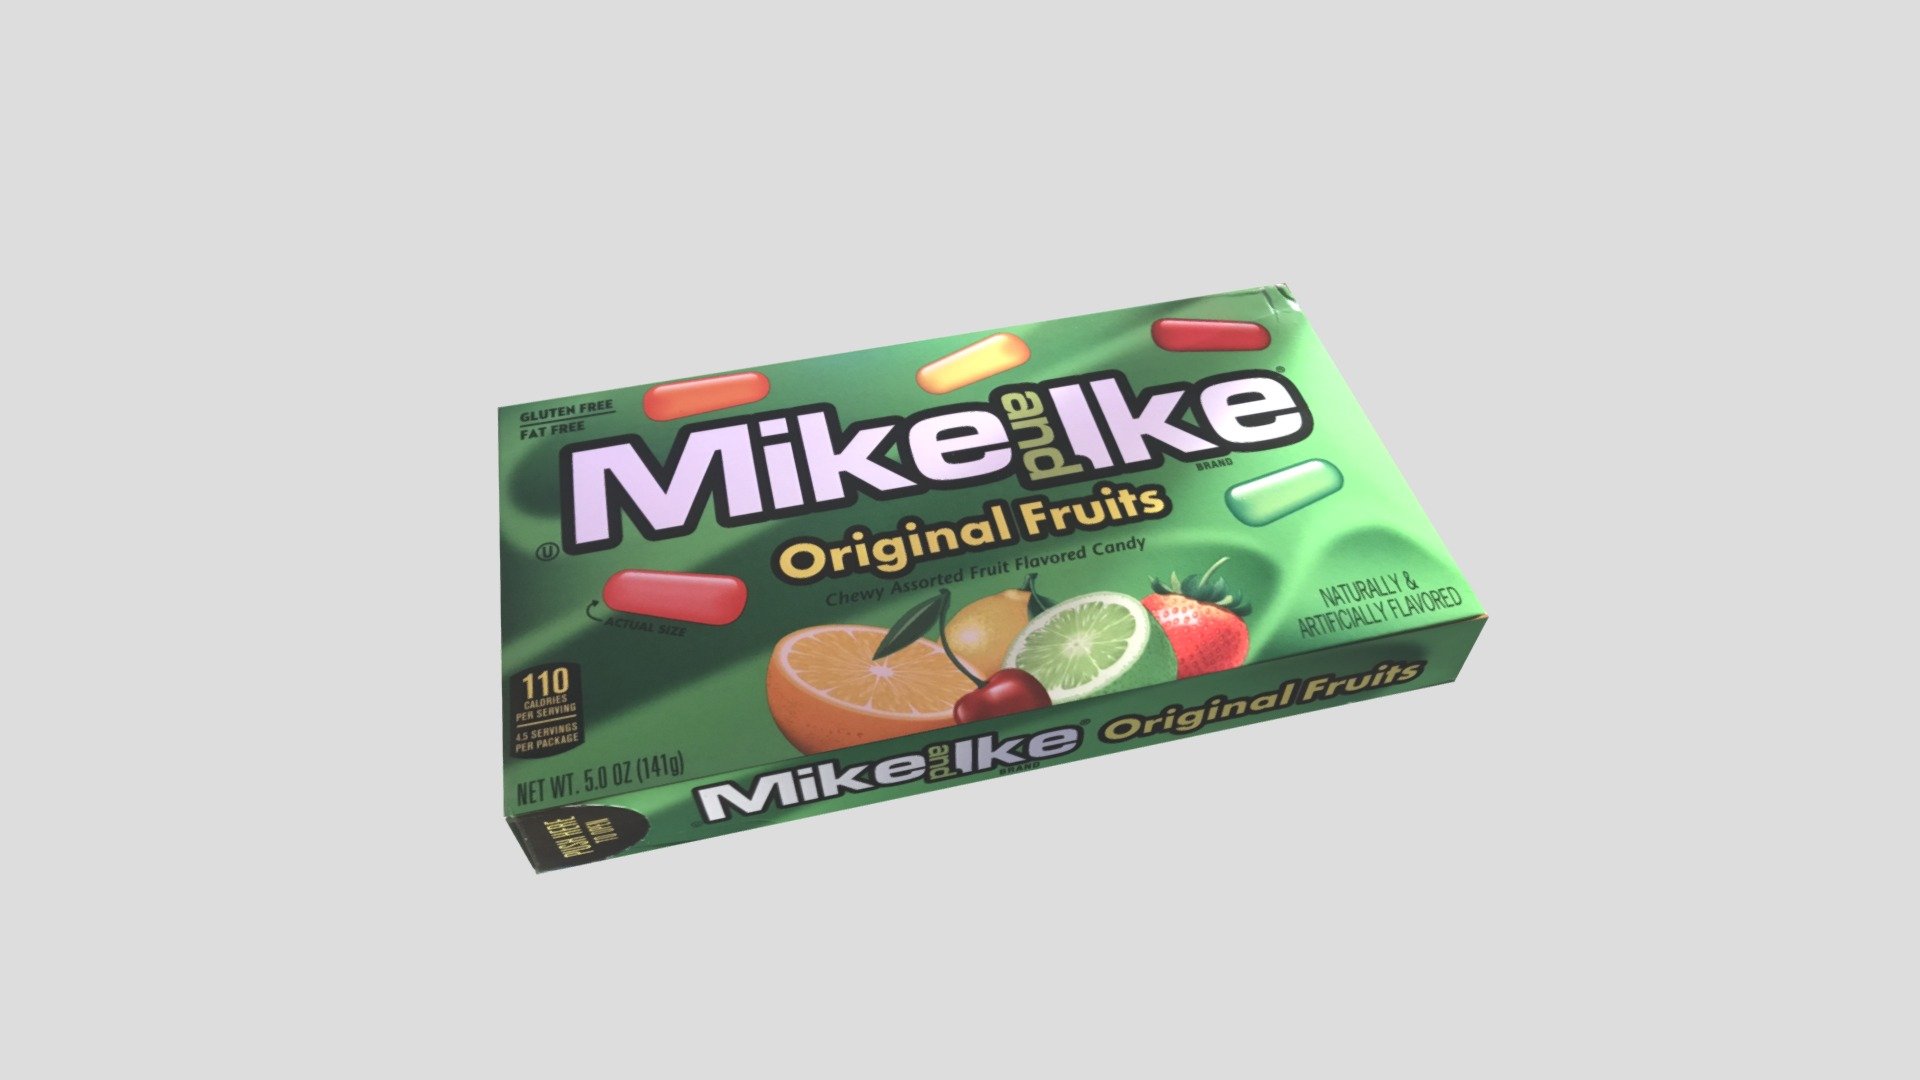 Modeled by NanoBunTV in like 10 minutes.

Now that I finished making this, I can finally EAT the candy!

I obviously don't own the Mike and Ike® trademark.

https://twitter.com/NanoBunTV



&ldquo;L Saroney Moment